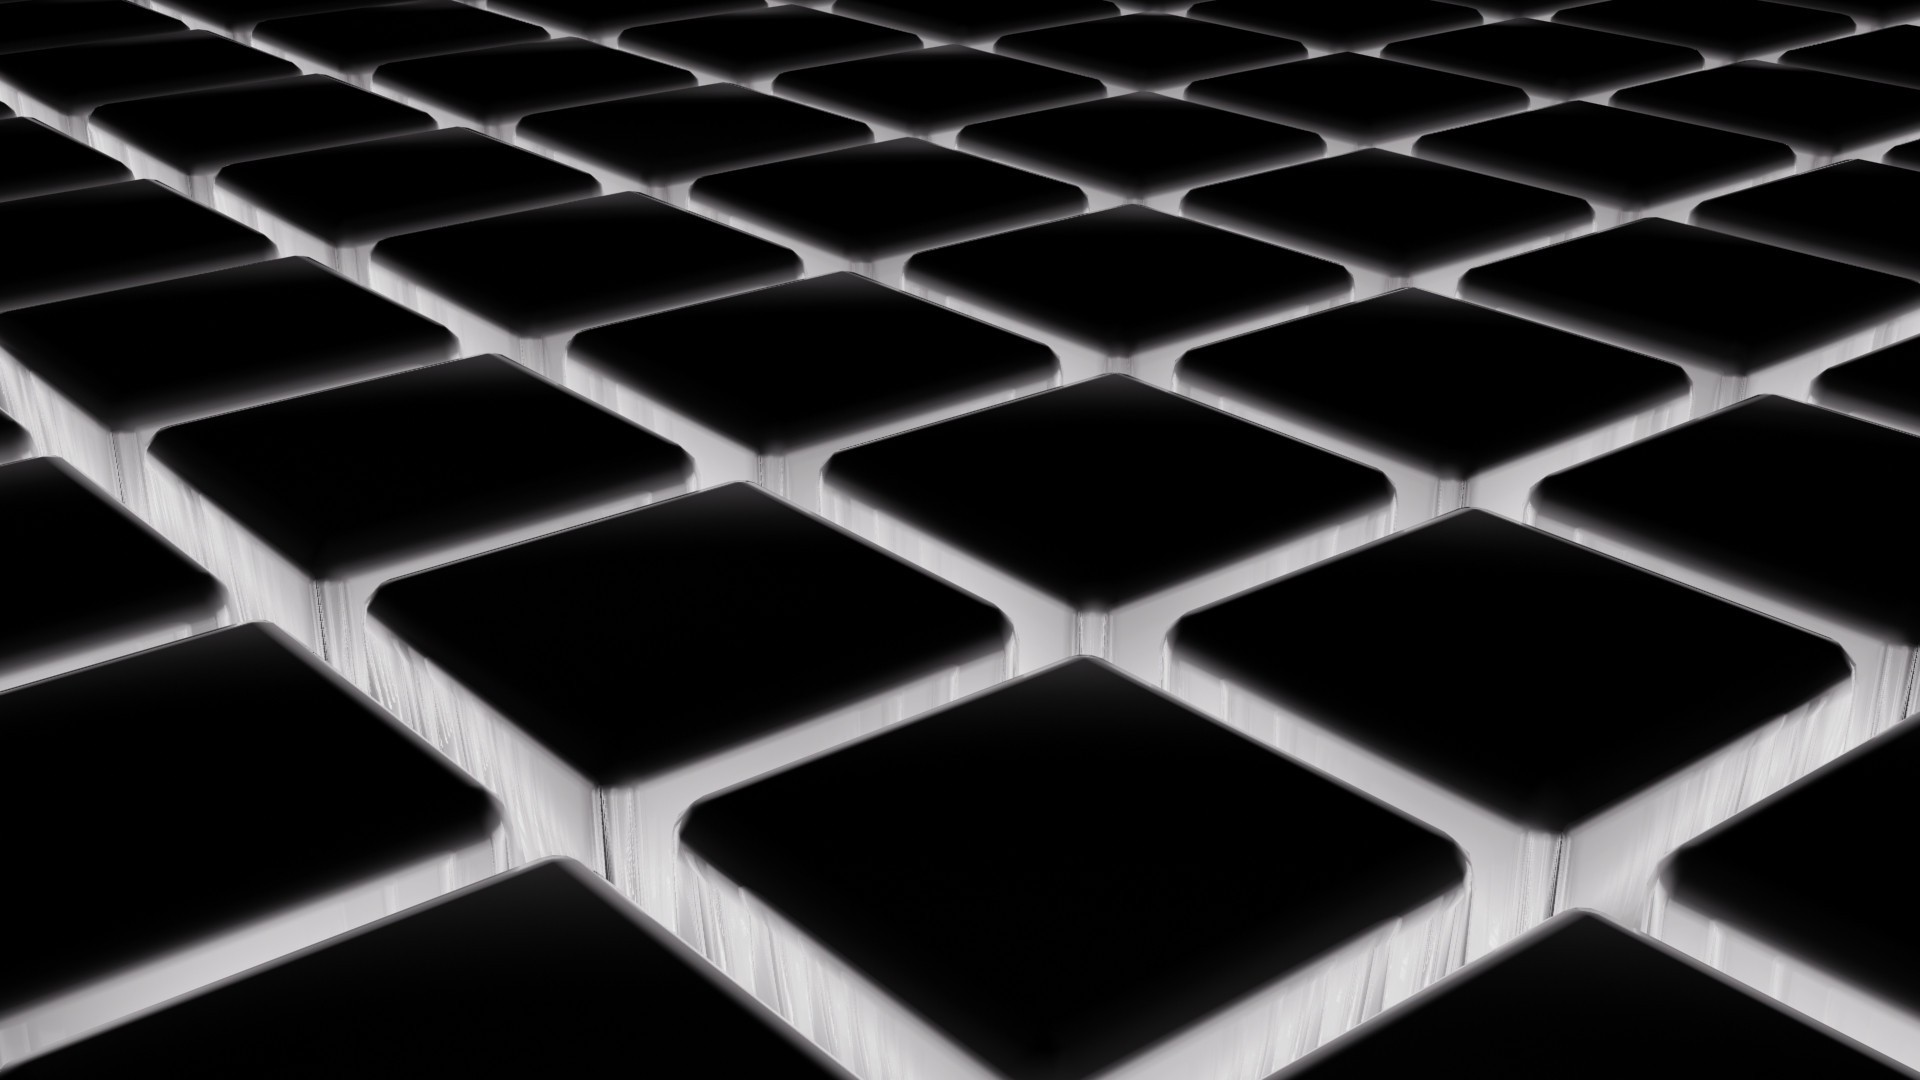 Abstract Seven Grid Wall Pattern Art iPhone 6 Wallpaper Download